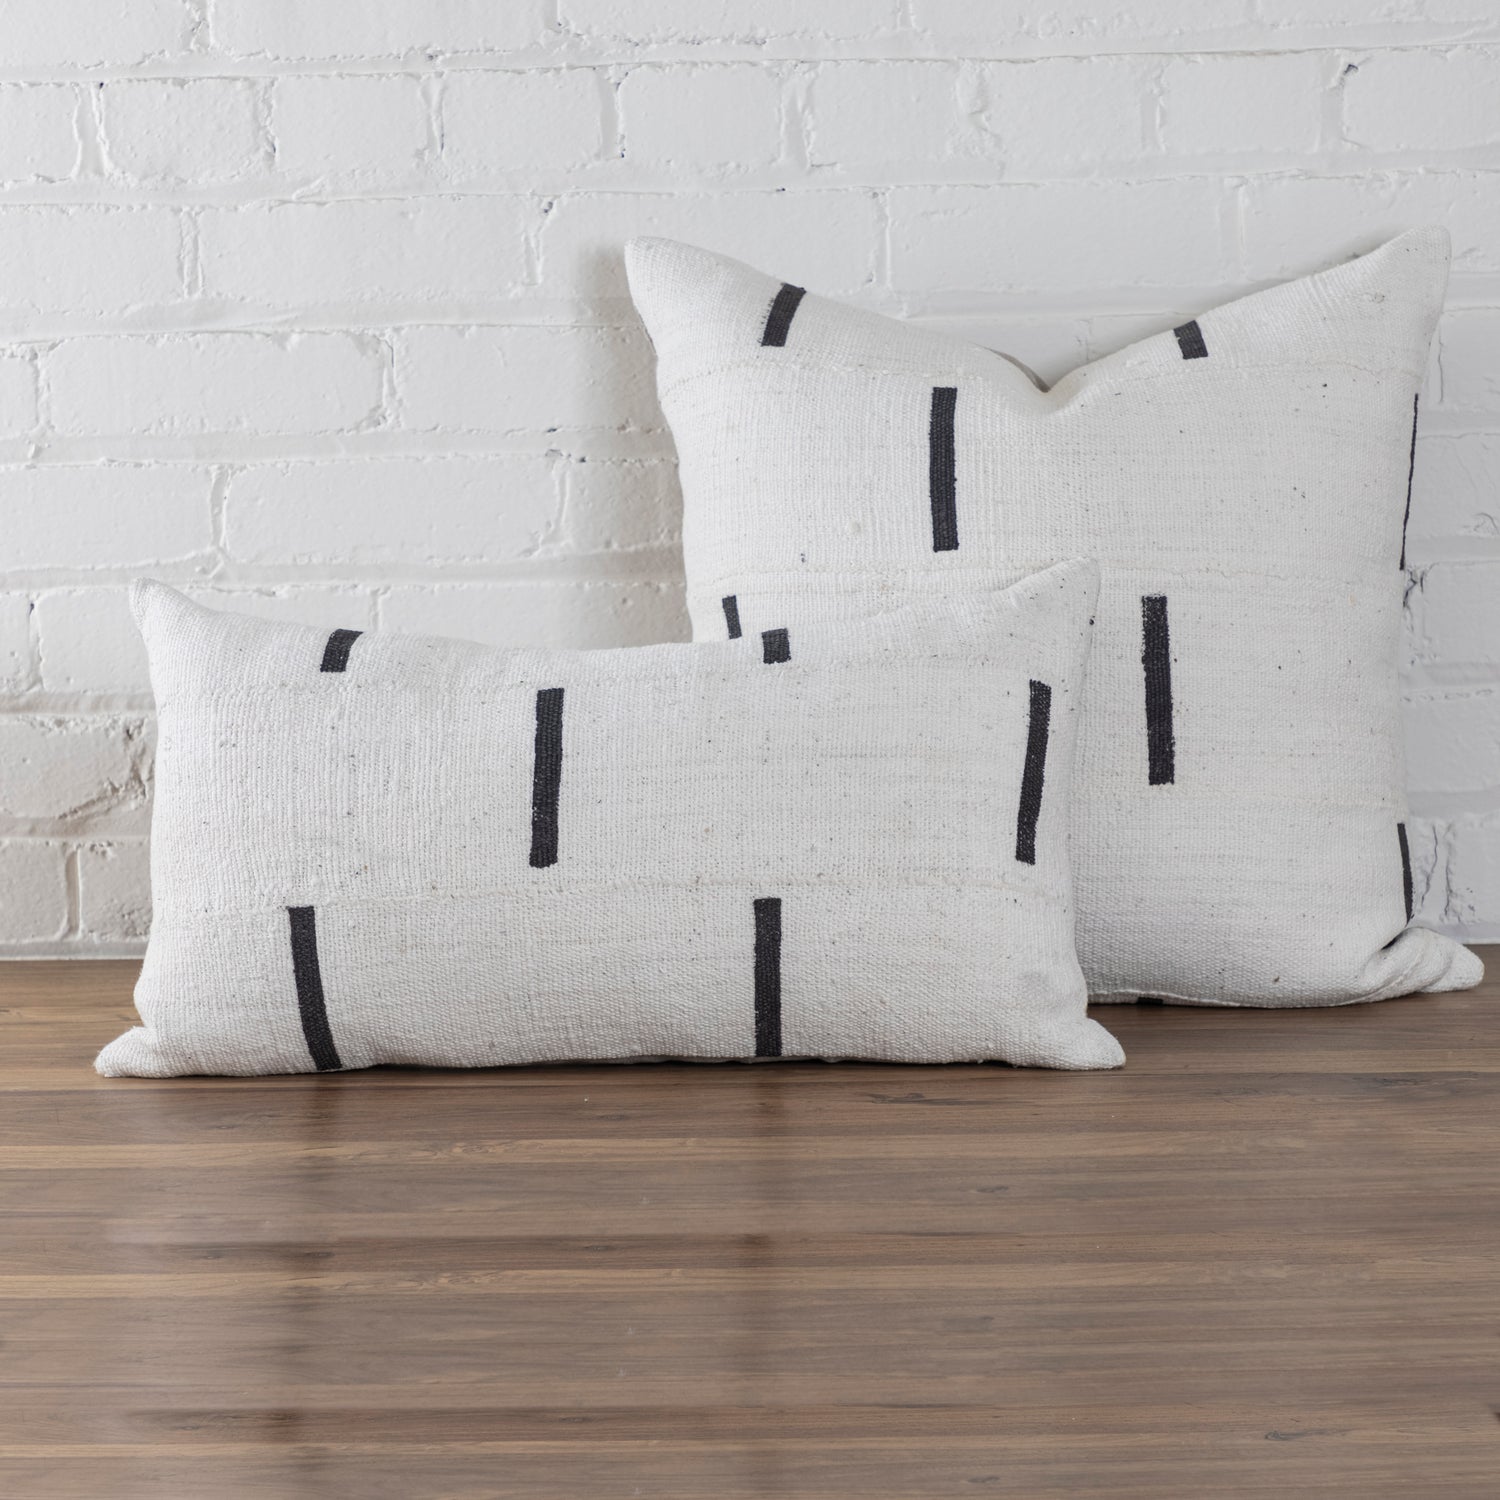 Mud Cloth Square Pillow, White with Black Dashes